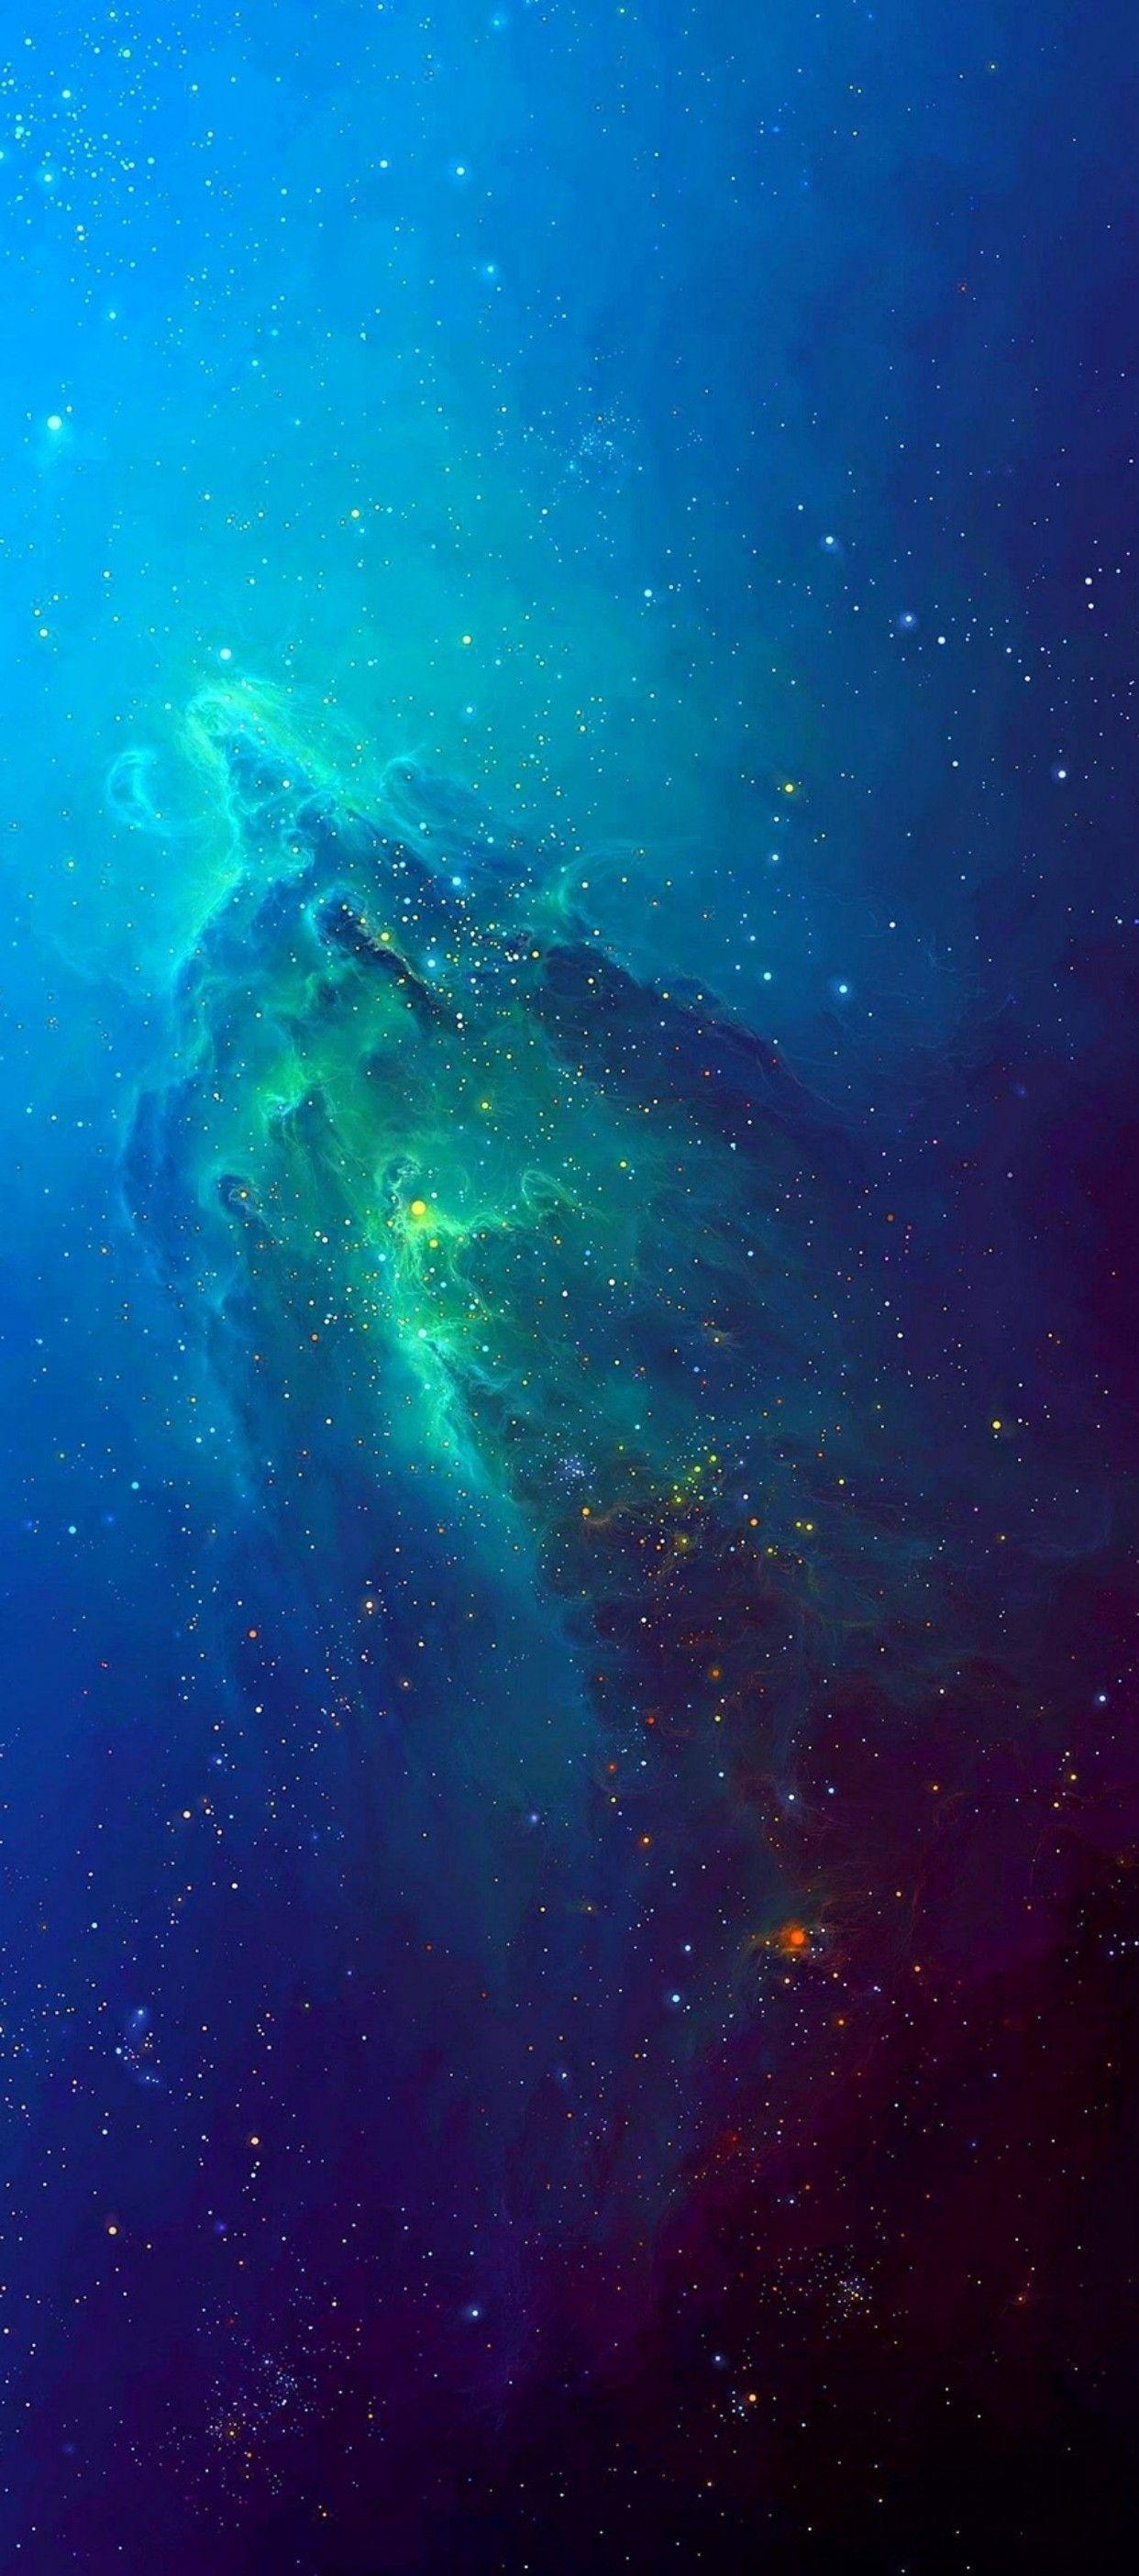 iOS iPhone X, stars, space, blue, aqua, abstract, apple, wallpaper, iphone clean, beauty, c. Space iphone wallpaper, Blue wallpaper iphone, Wallpaper space